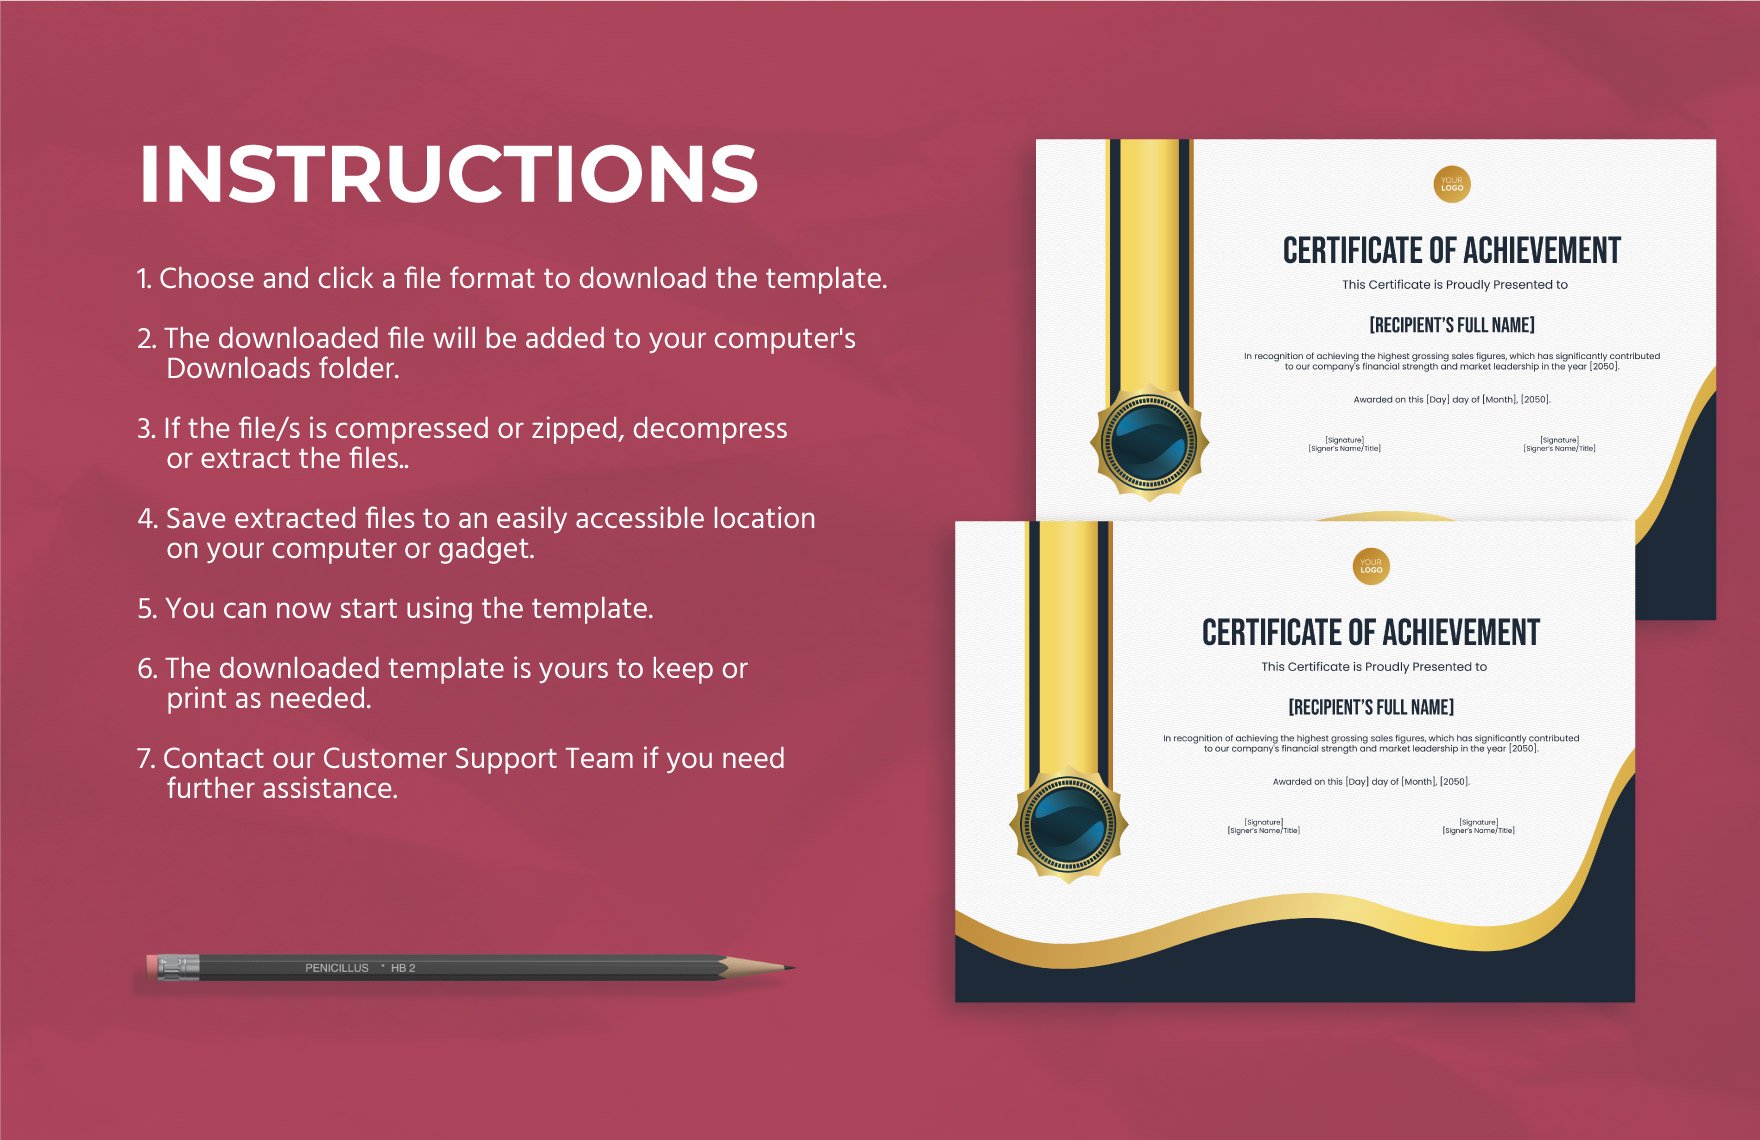 Highest Grossing Sales Certificate Template